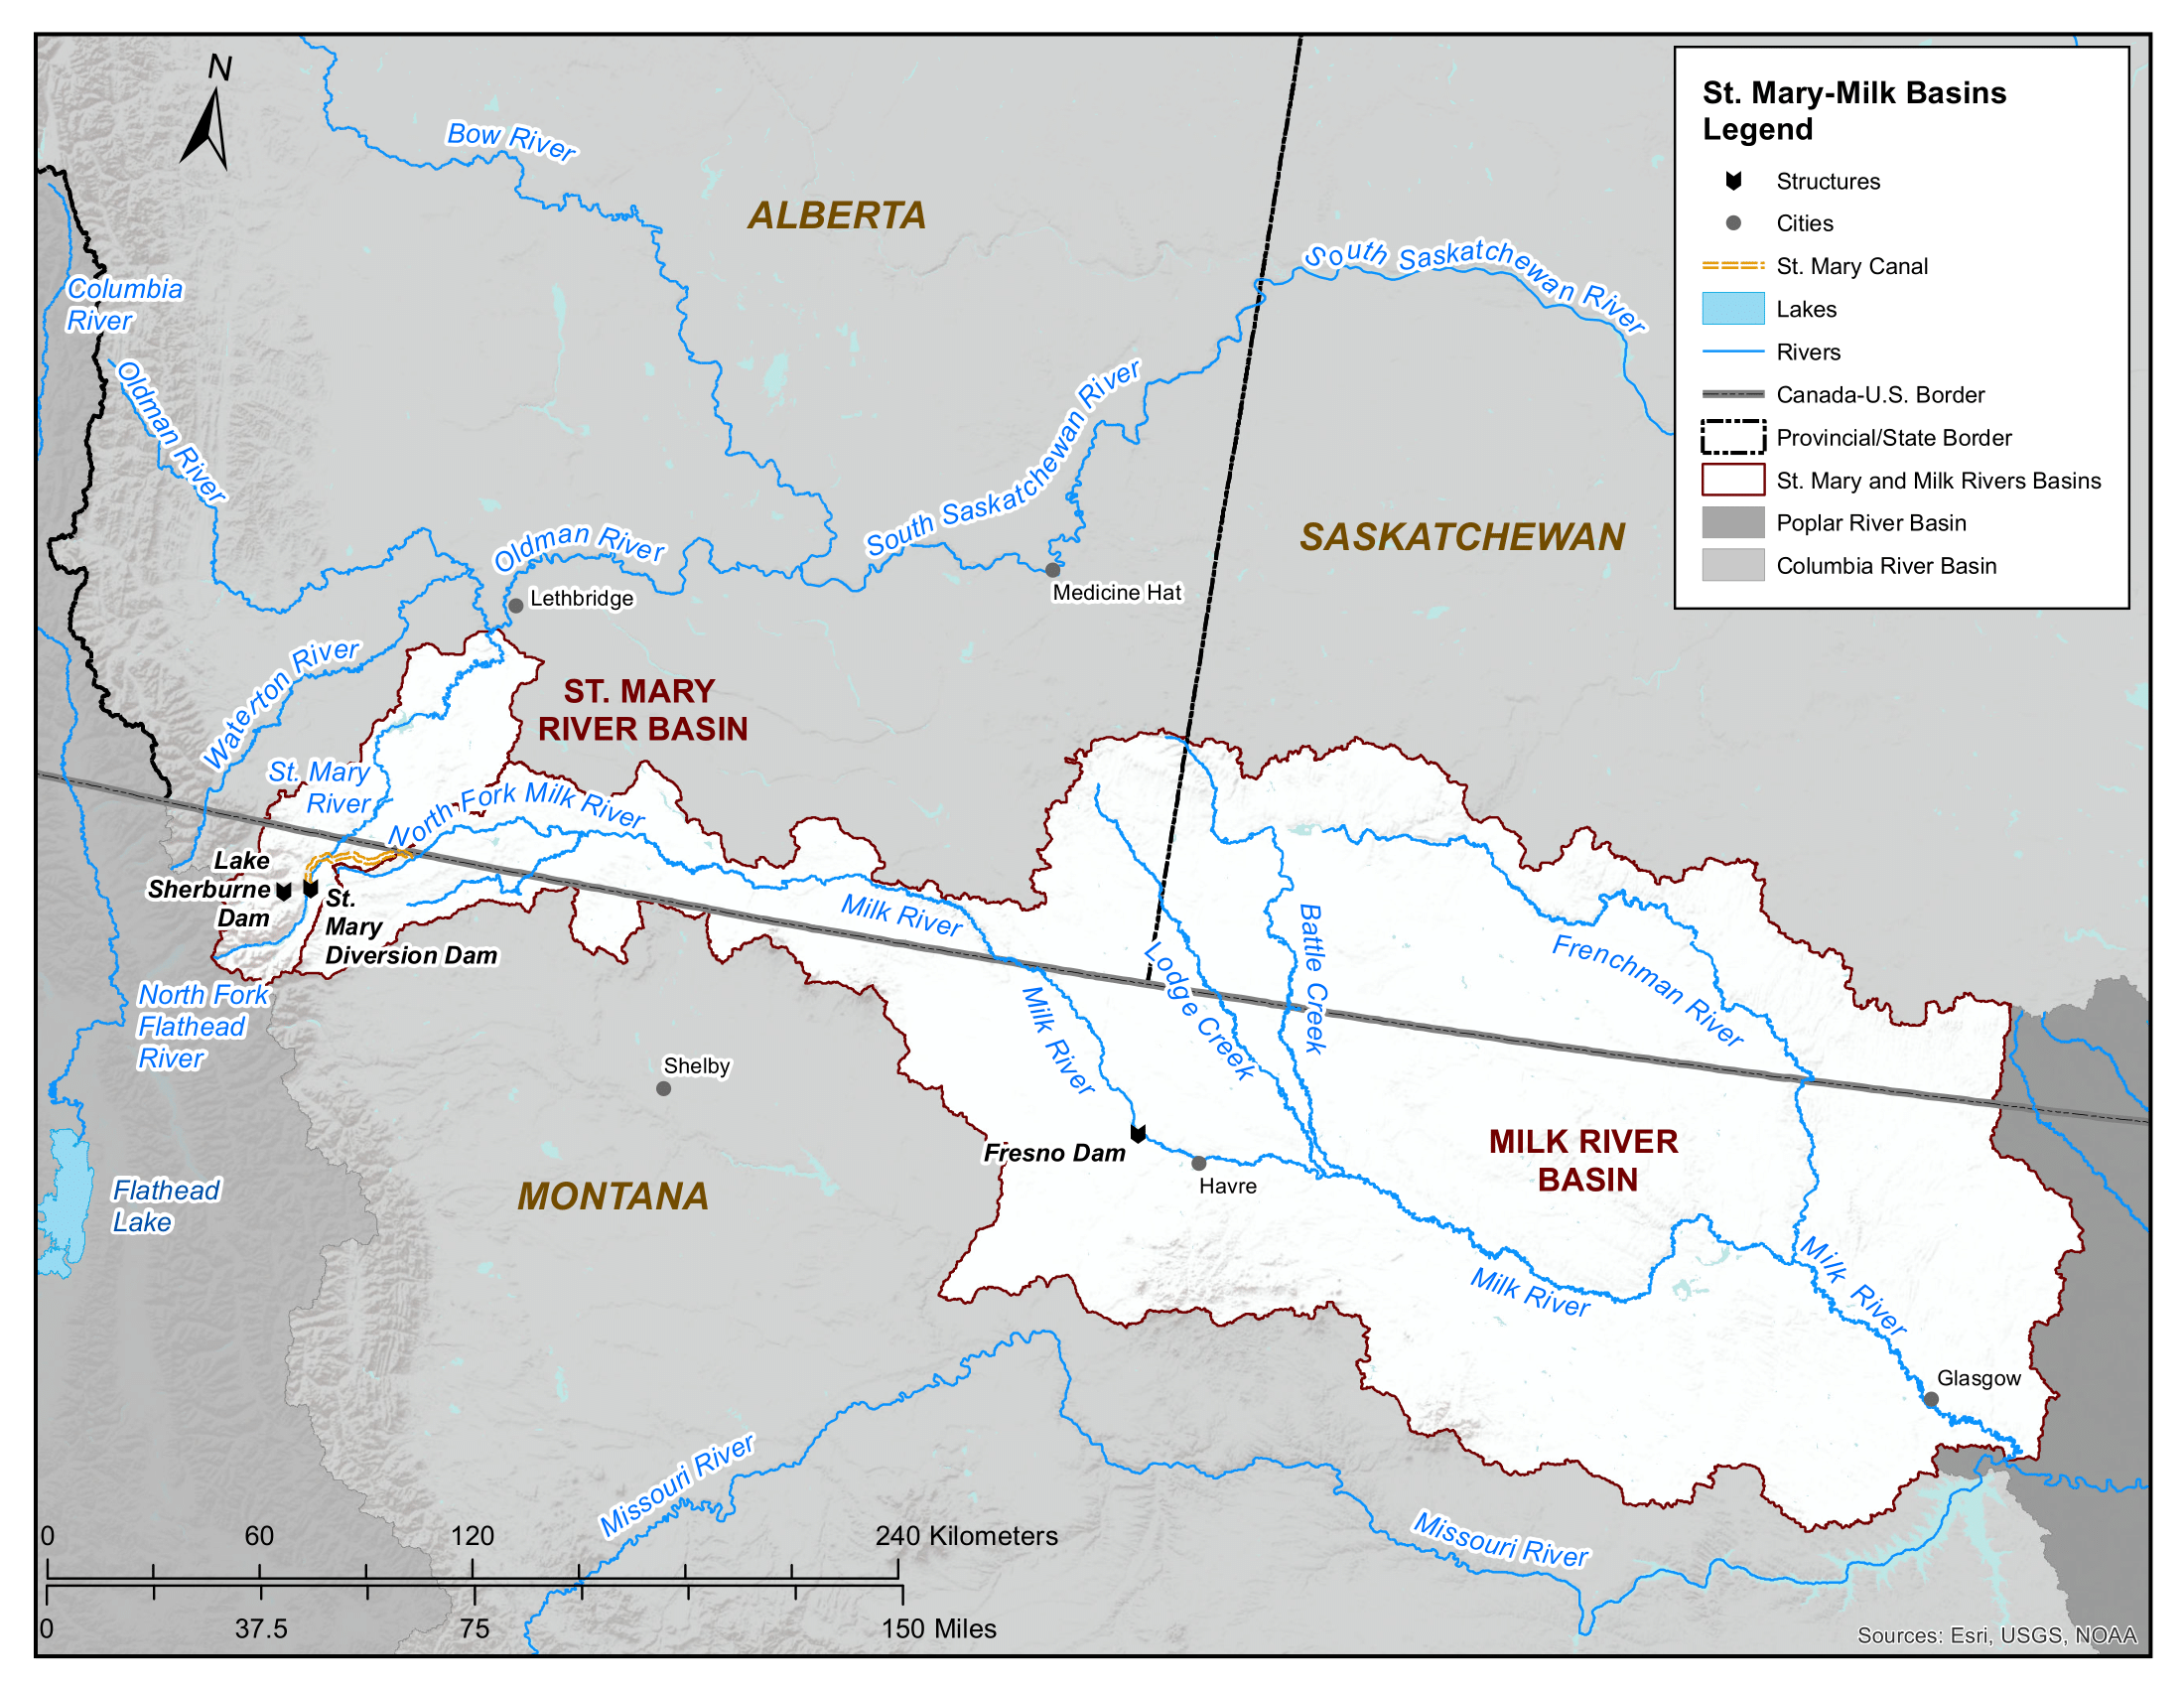 Map of St. Mary and Milk River Basins